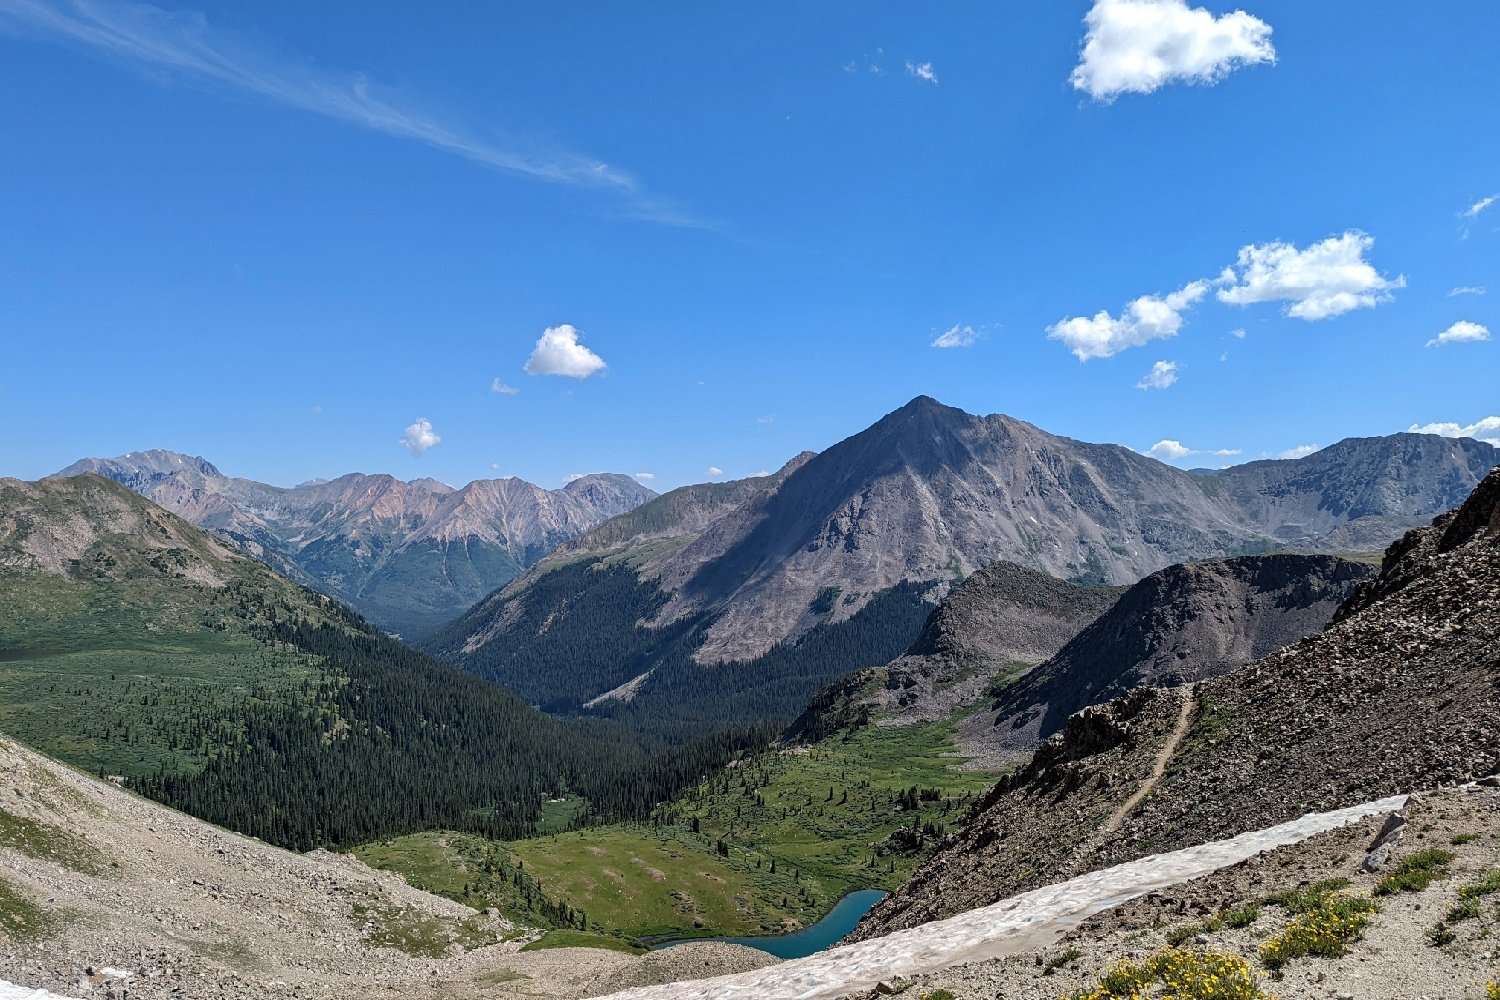 A view of several peaks from a mountain pass on the Colorado Trail